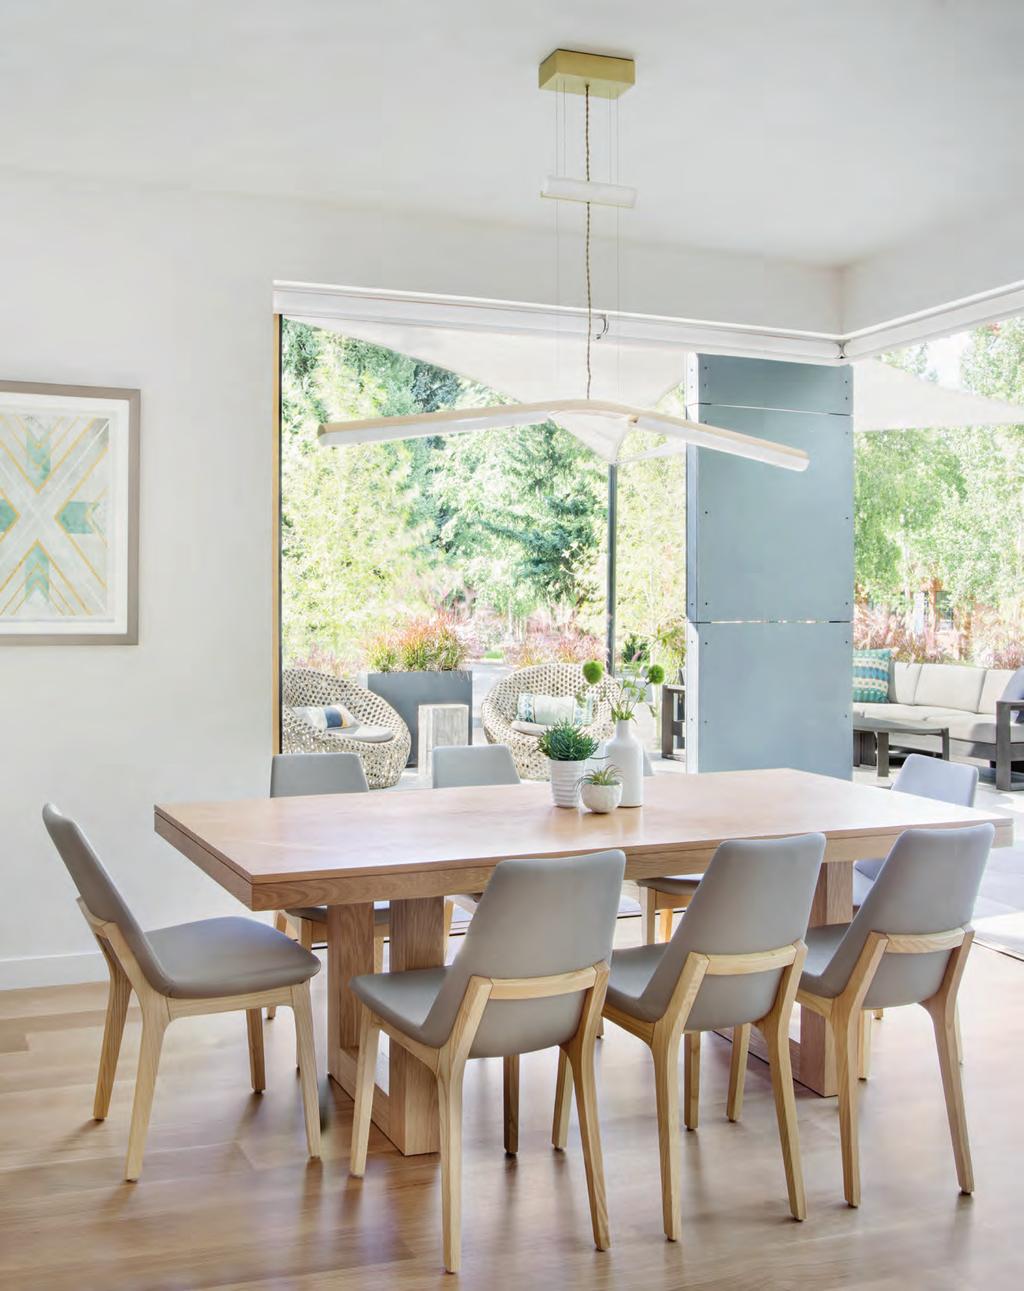 The dining area ties to the terrace via glass doors by Pacific Architectural Millwork that pocket into the walls.